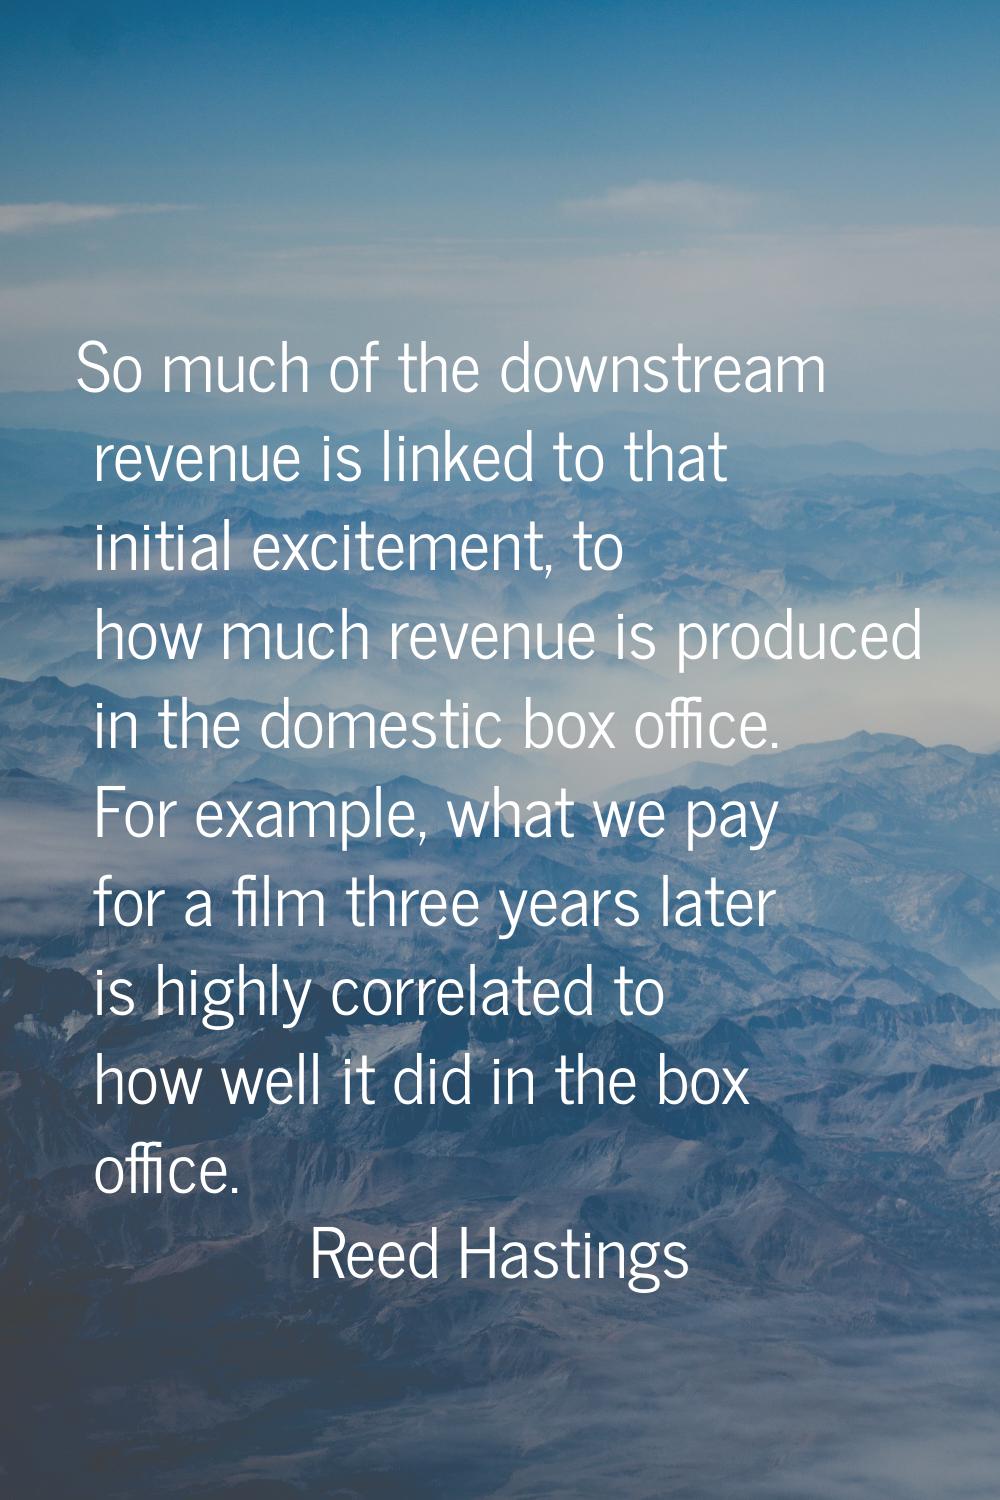 So much of the downstream revenue is linked to that initial excitement, to how much revenue is prod